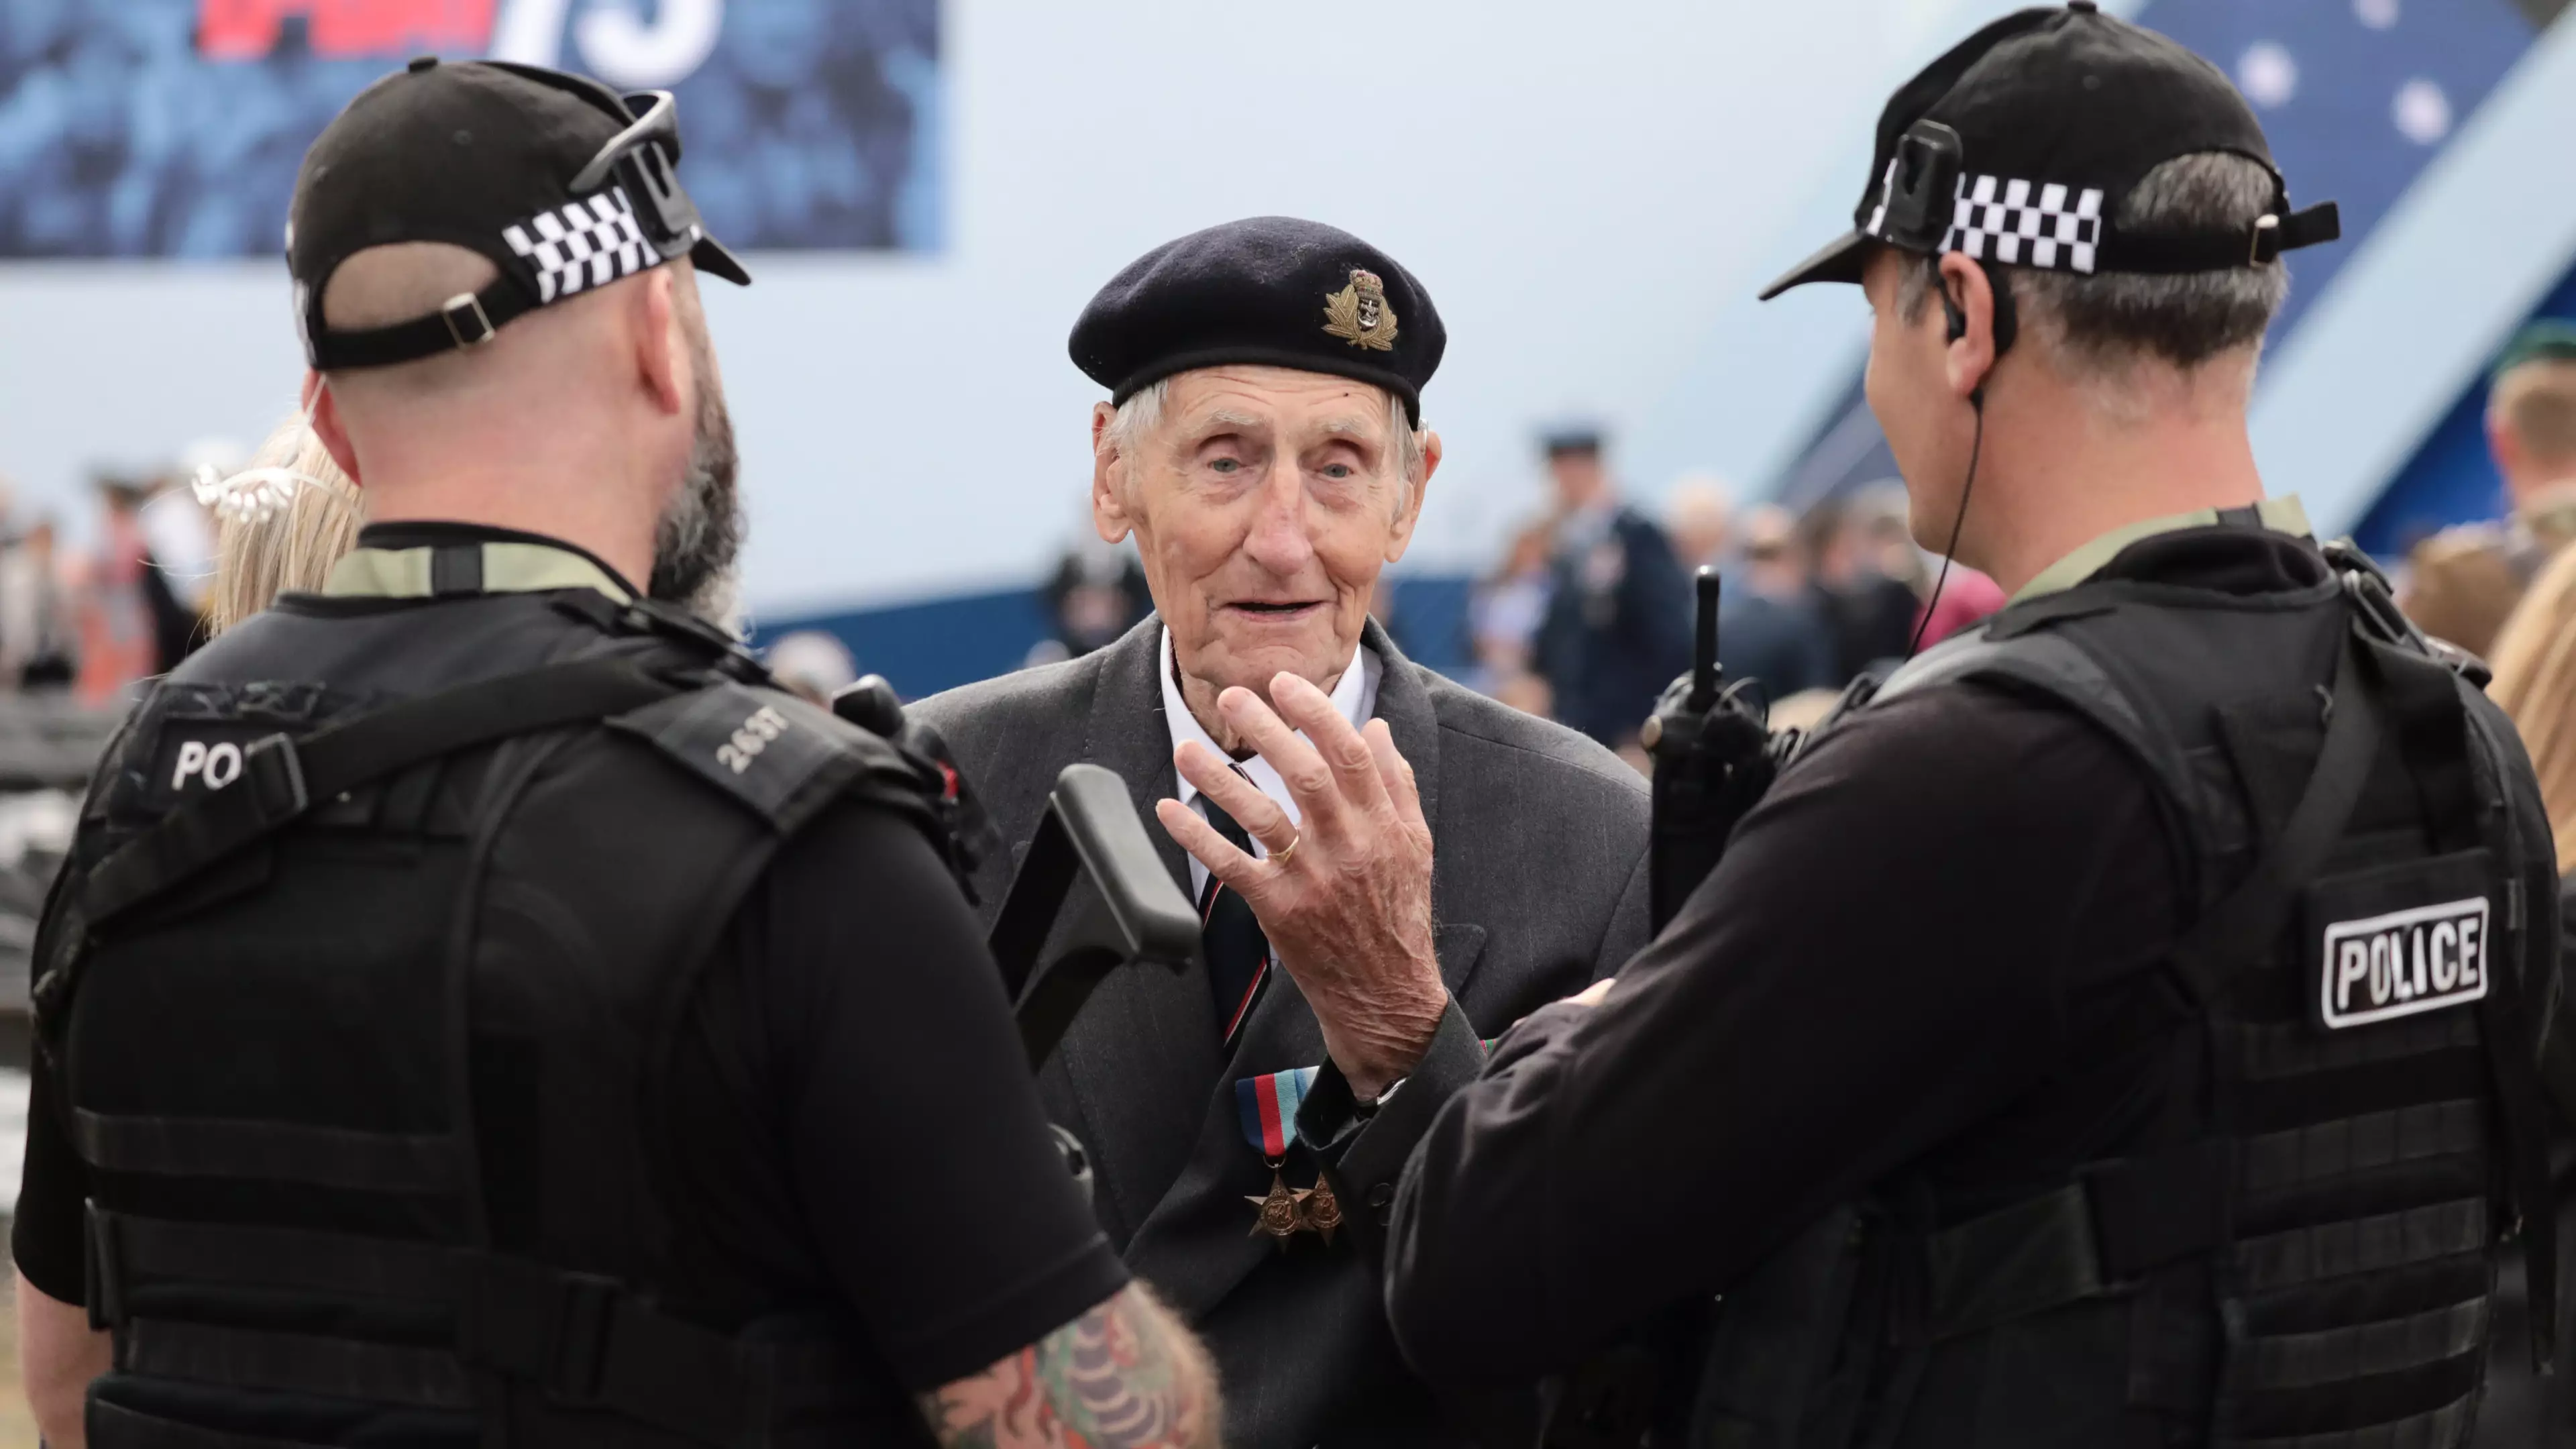 D-Day Hero Returns To Normandy After Surviving Hammer Attack